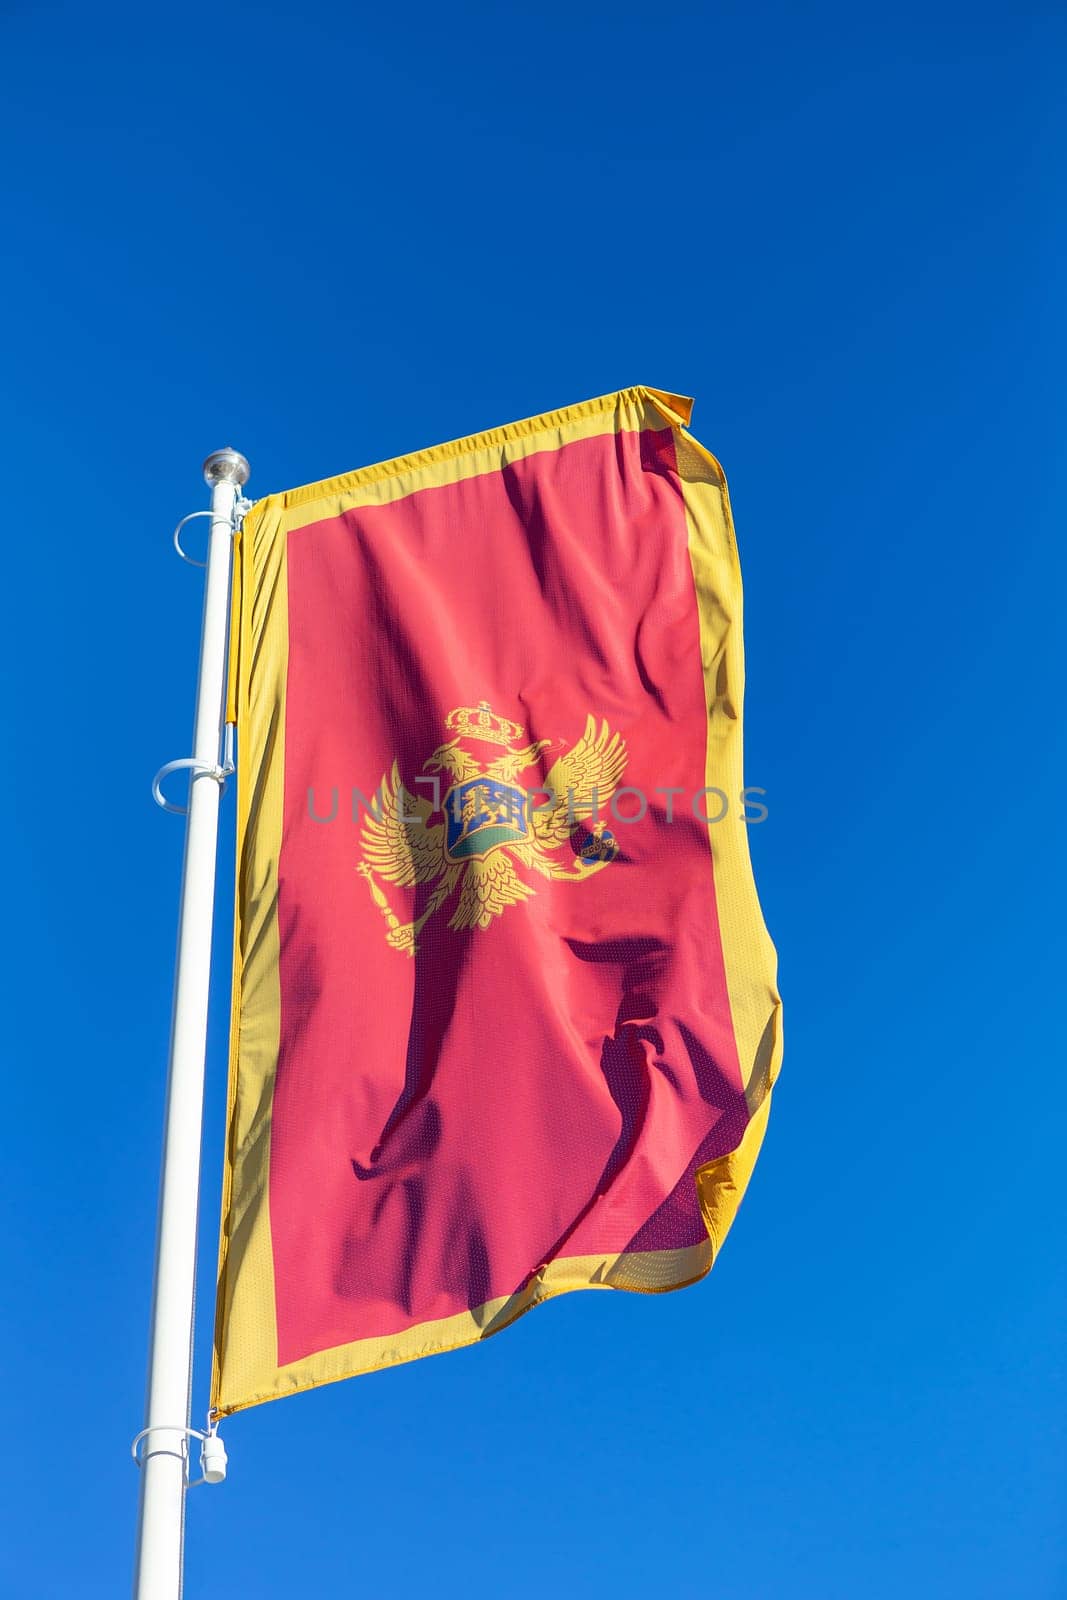 The flag of montenegro develops in a blue and clear sky. The national flag is one of the symbols of the state. by sfinks